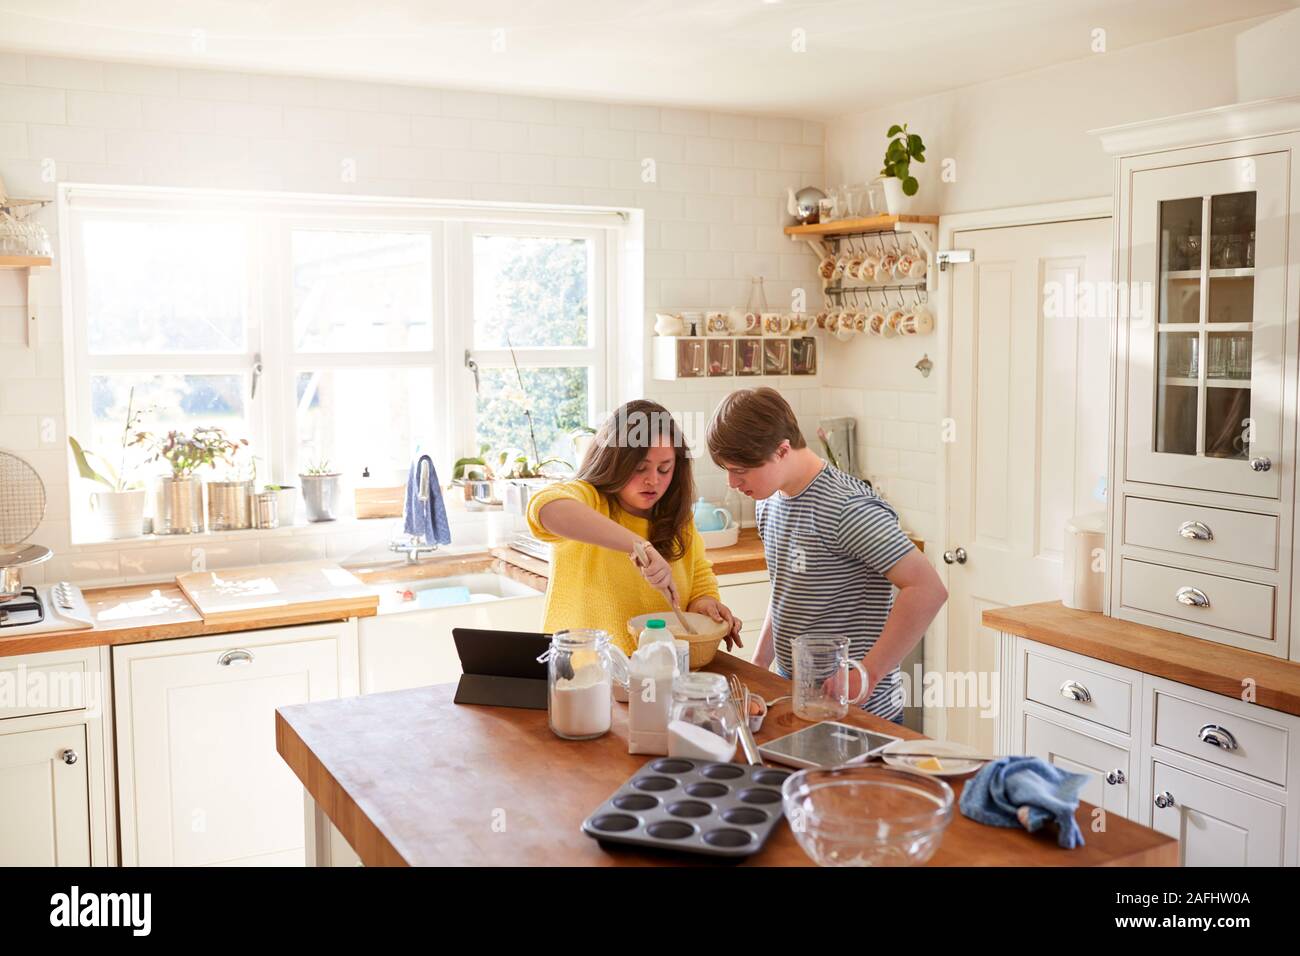 Young Downs Syndrome Couple Following Recipe On Digital Tablet To Bake Cake In Kitchen At Home Stock Photo